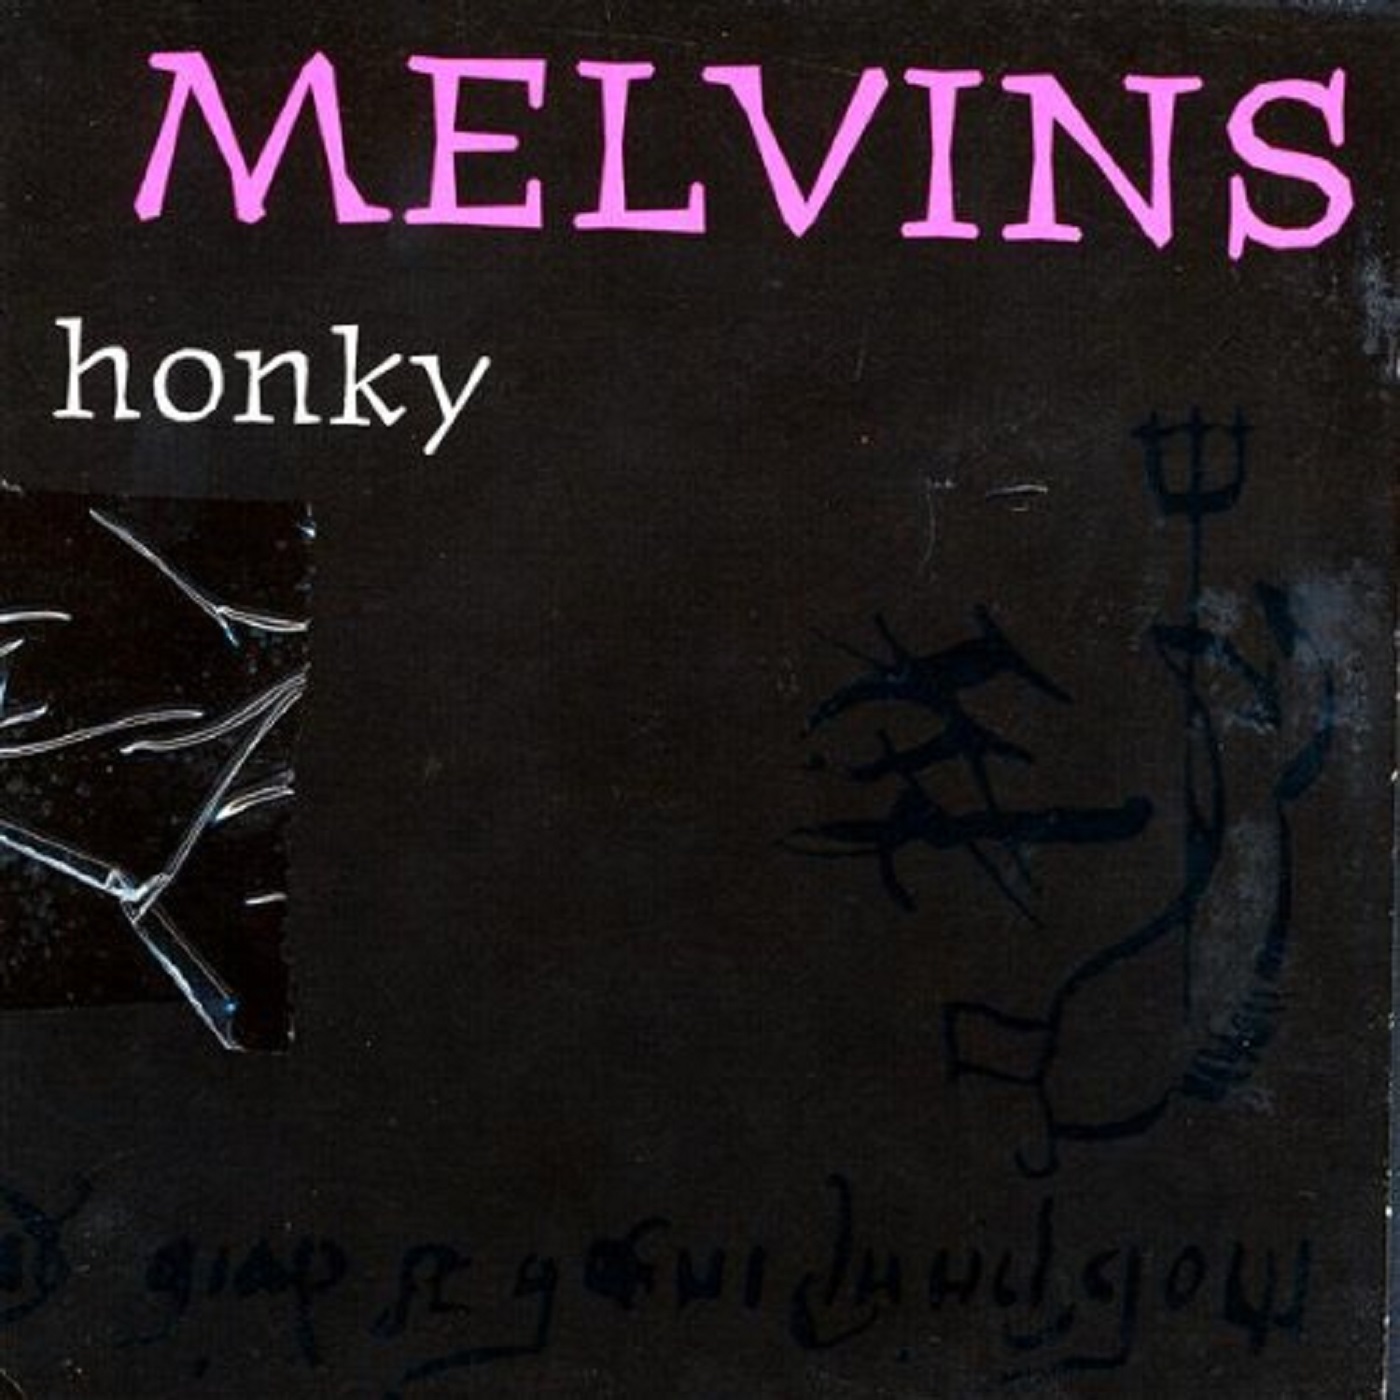 The Mevlins’ “Honky” (with Don White)